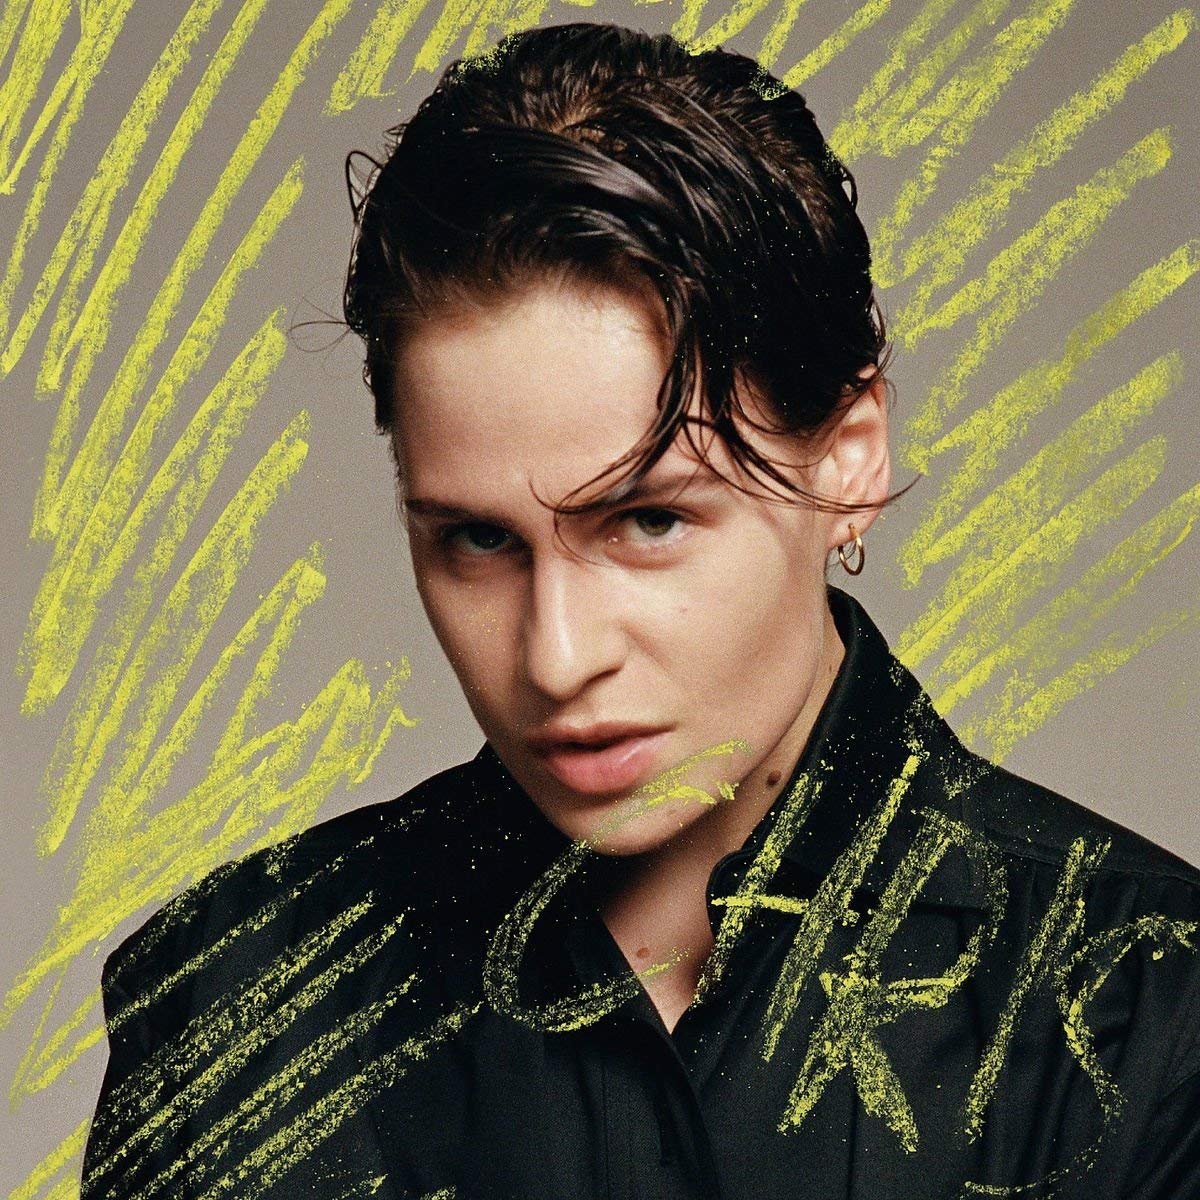 Christine and the Queens “Chris”